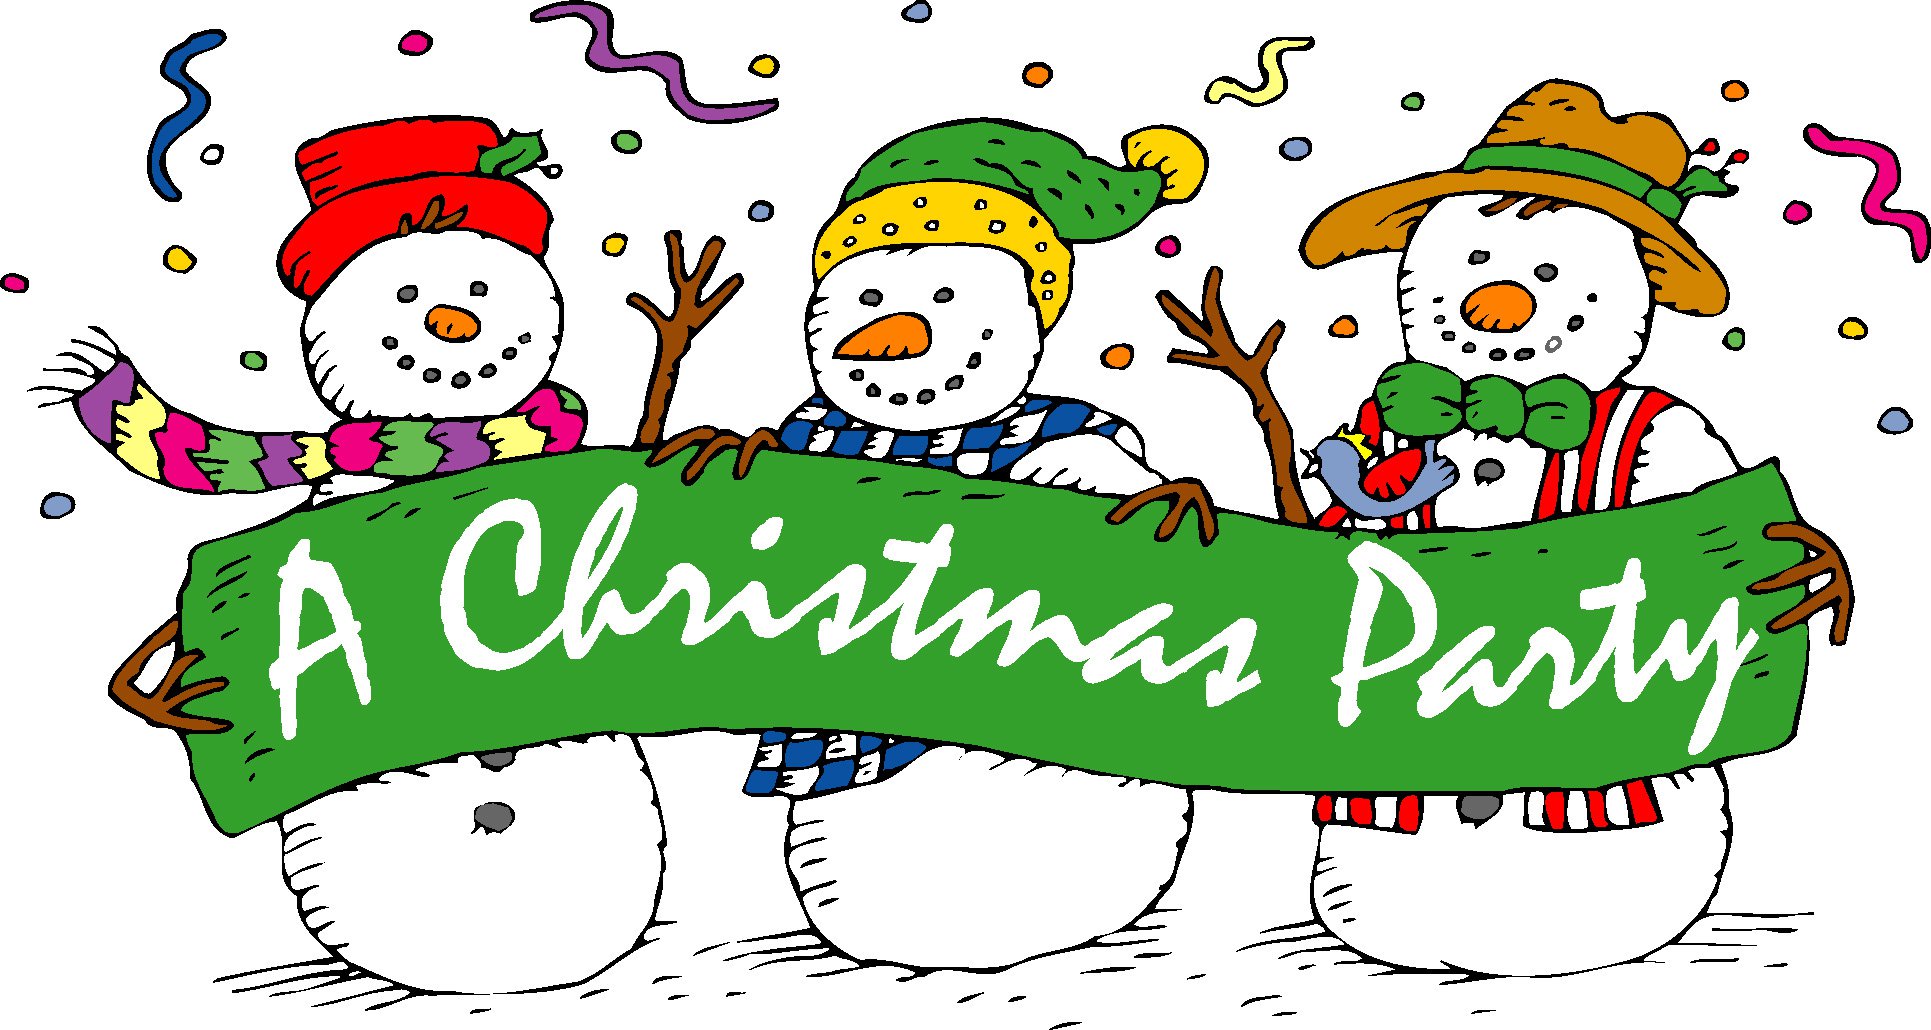 Christmas party images clip art clipartbarn.